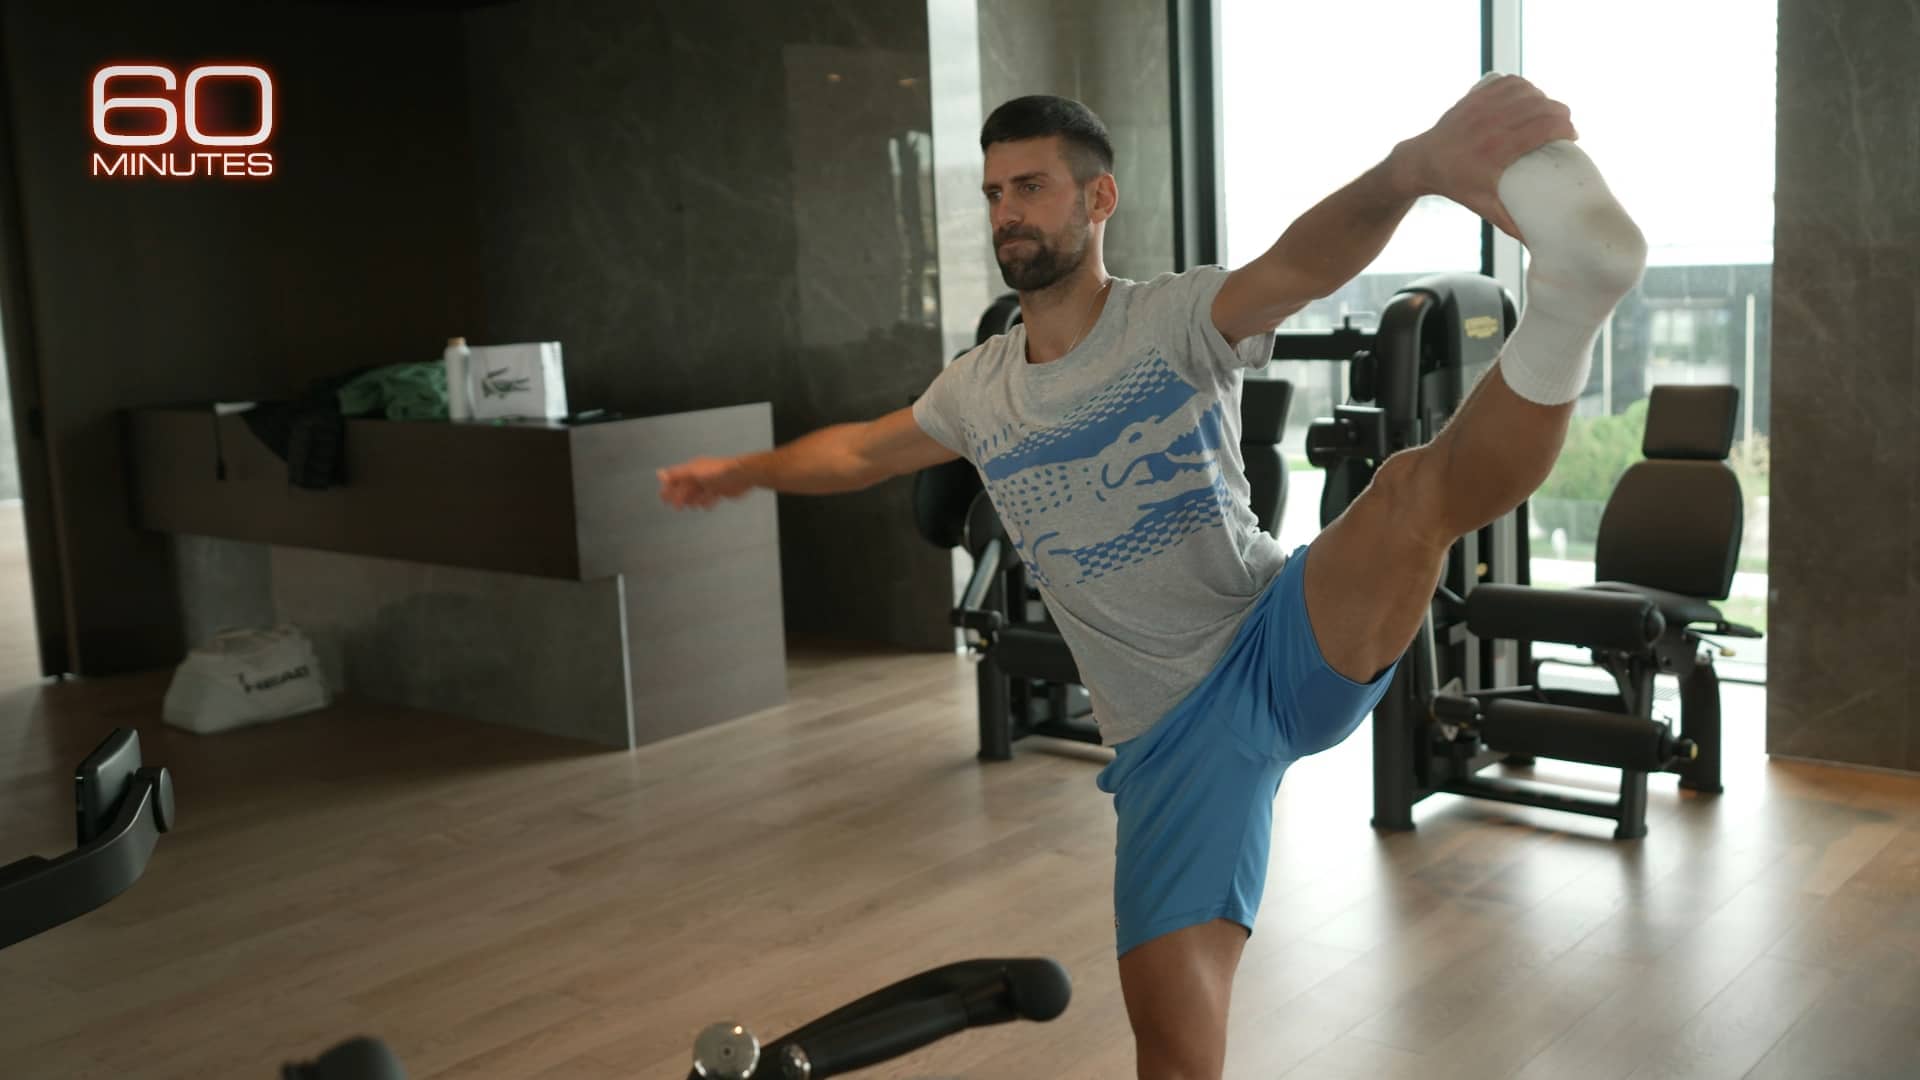 Novak Djokovic stretches during a 60 MINUTES feature on him. 